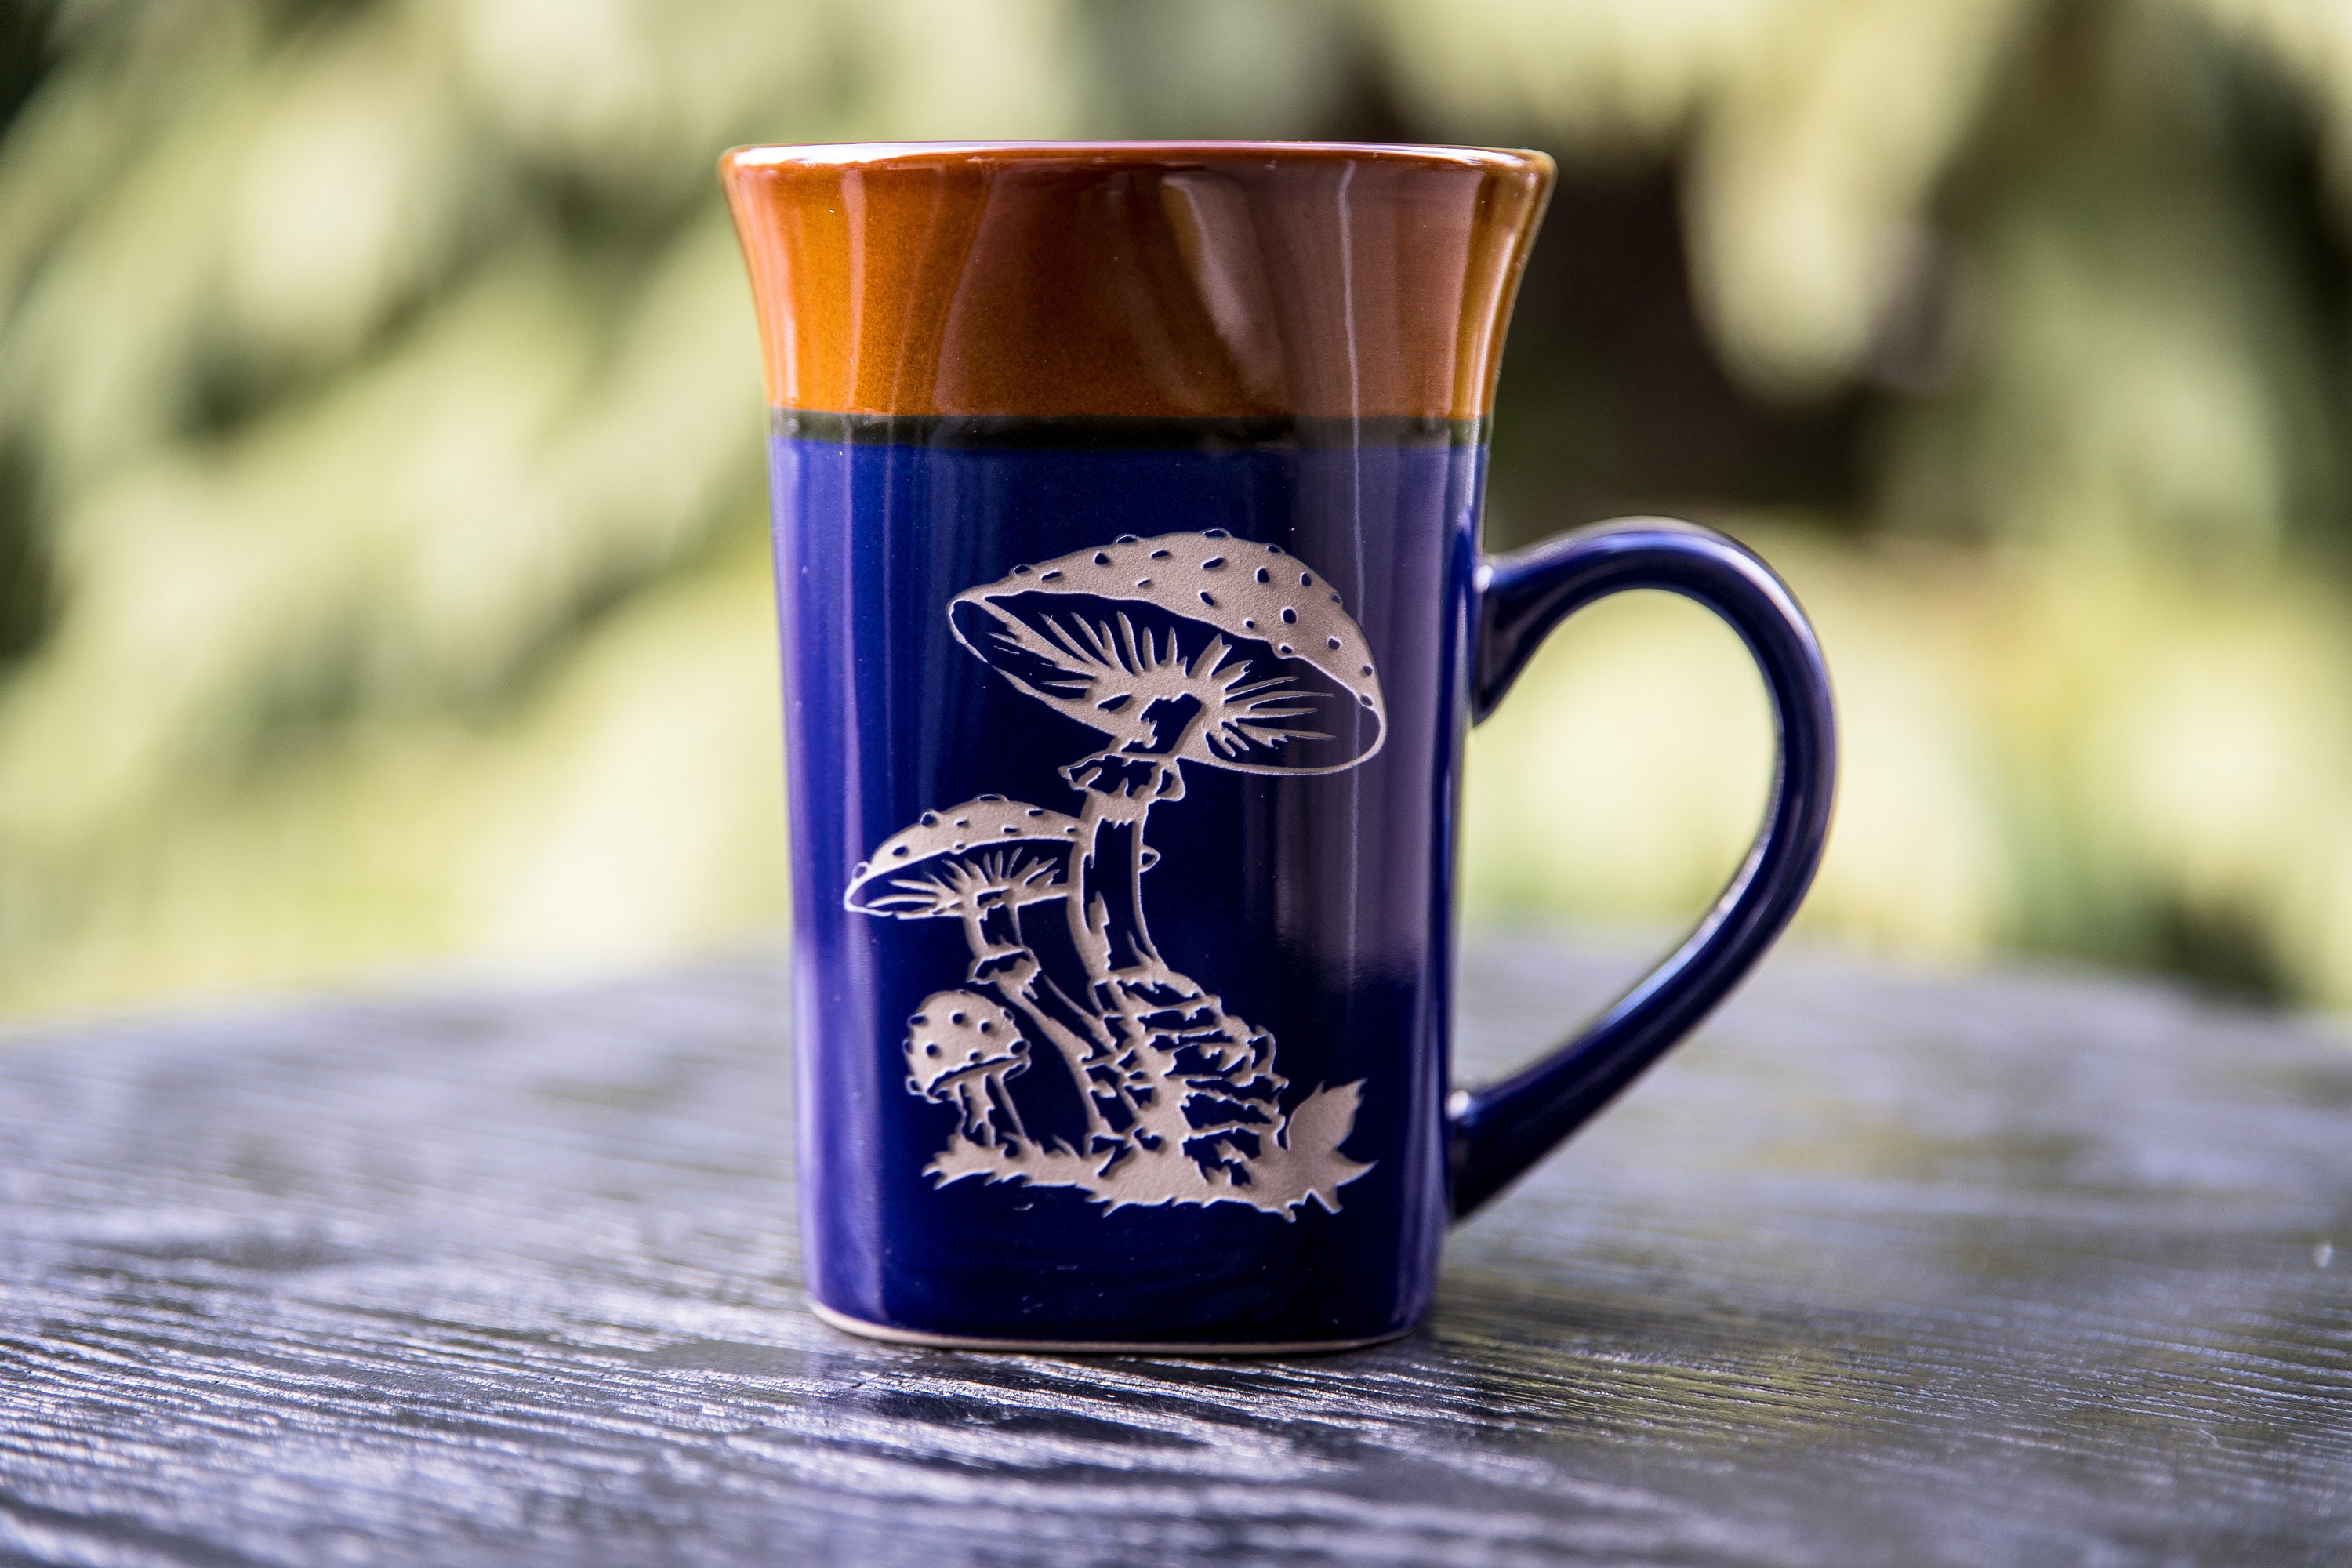 Handmade Sand Carving Done By Set In Stone USA Mushroom Coffee mug or Tea cup Deep Carved Engraved Square Two-Tone Flared-Rim Stoneware Mug The mug is manufactured by Royal Norfolk 14 oz